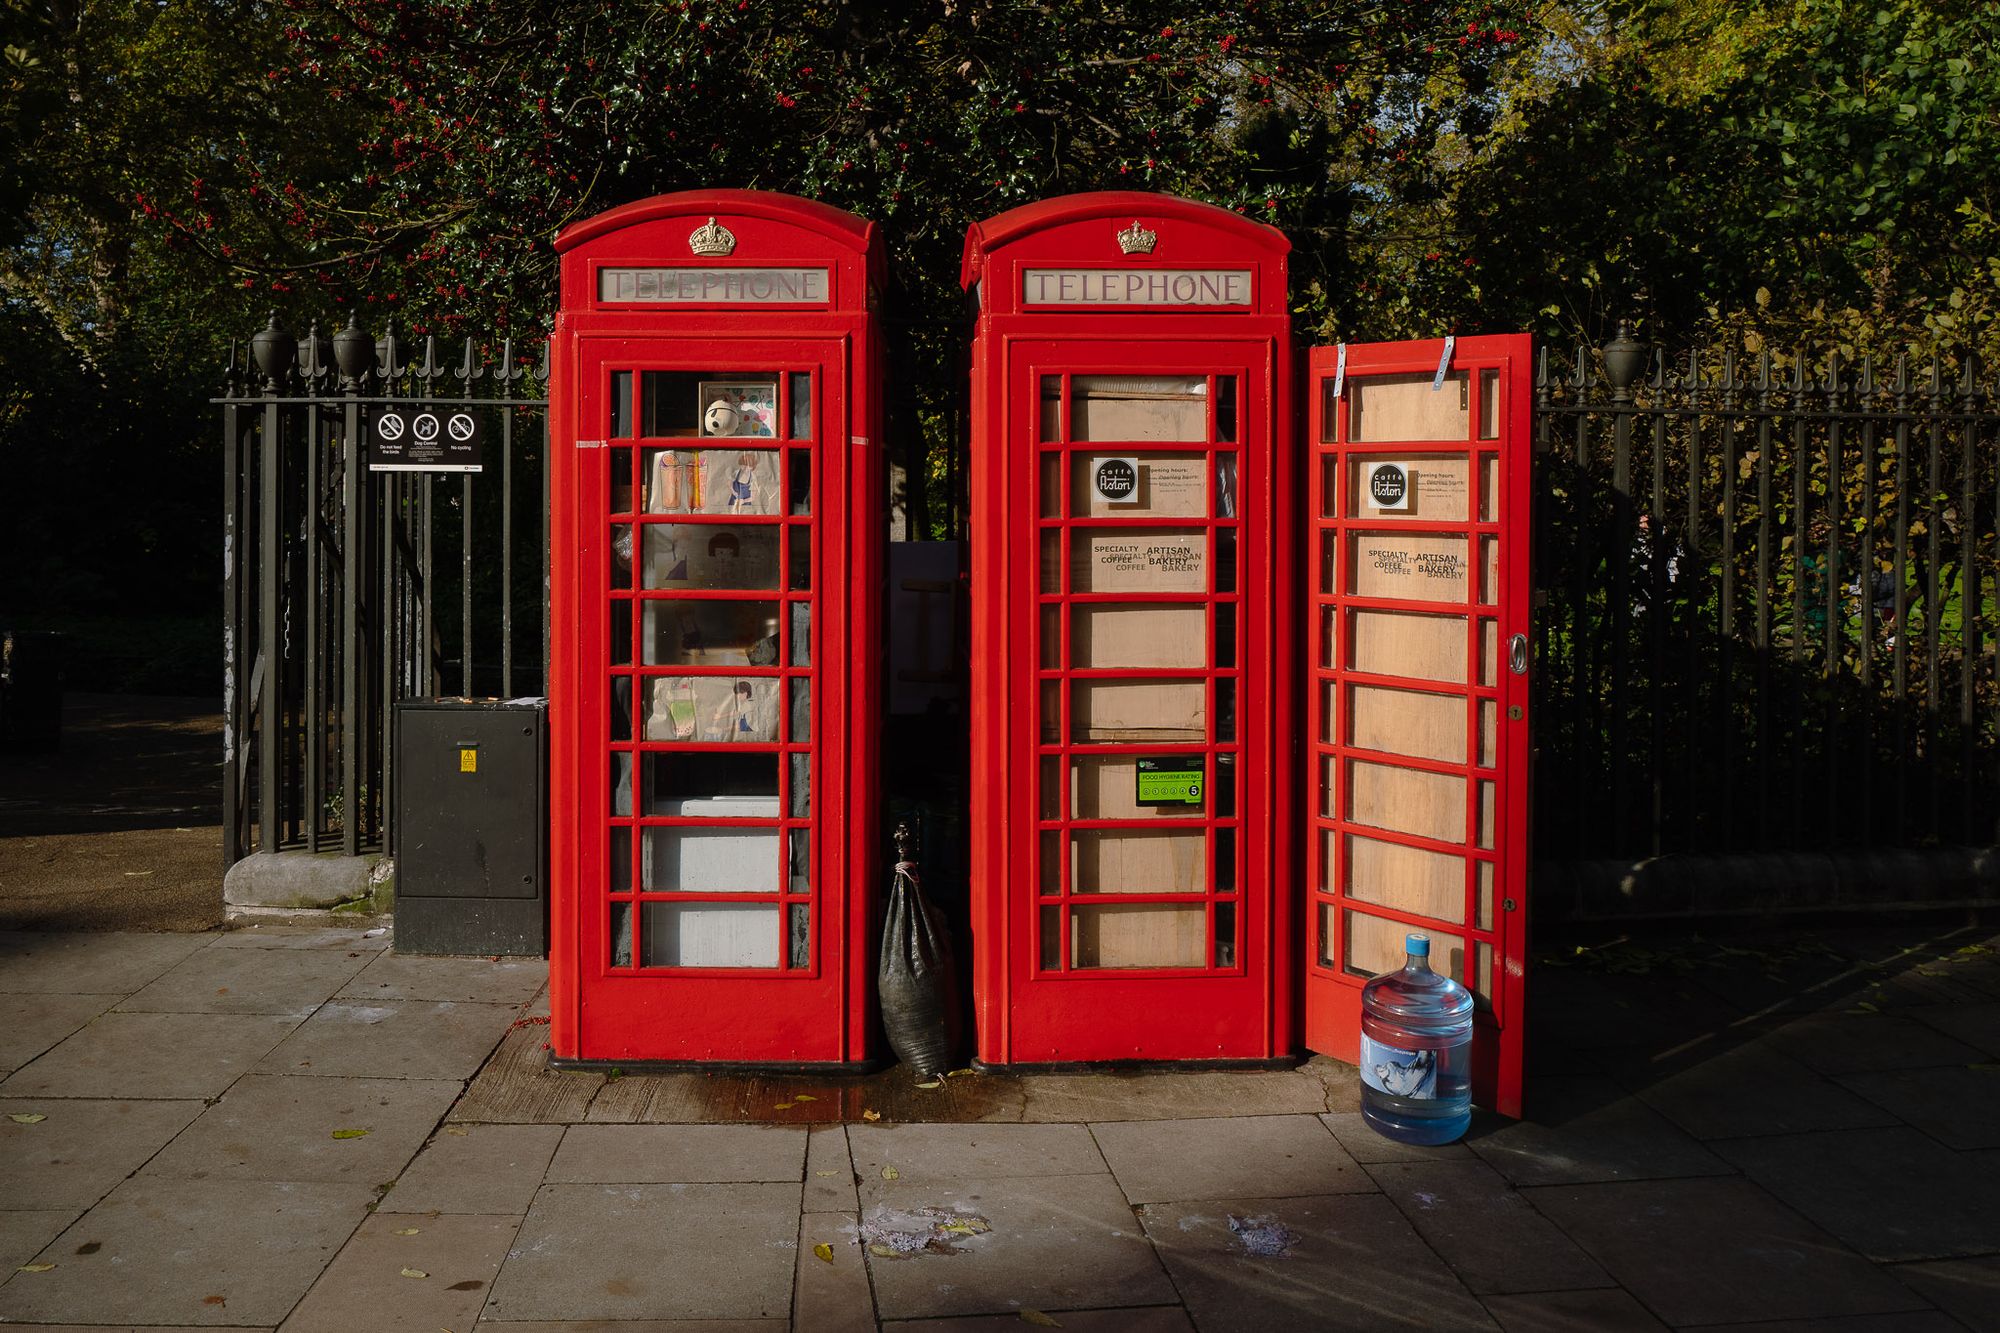 Two red telephone boxes are nicely lit in the evening sun outside a park. One is a small coffee shop.